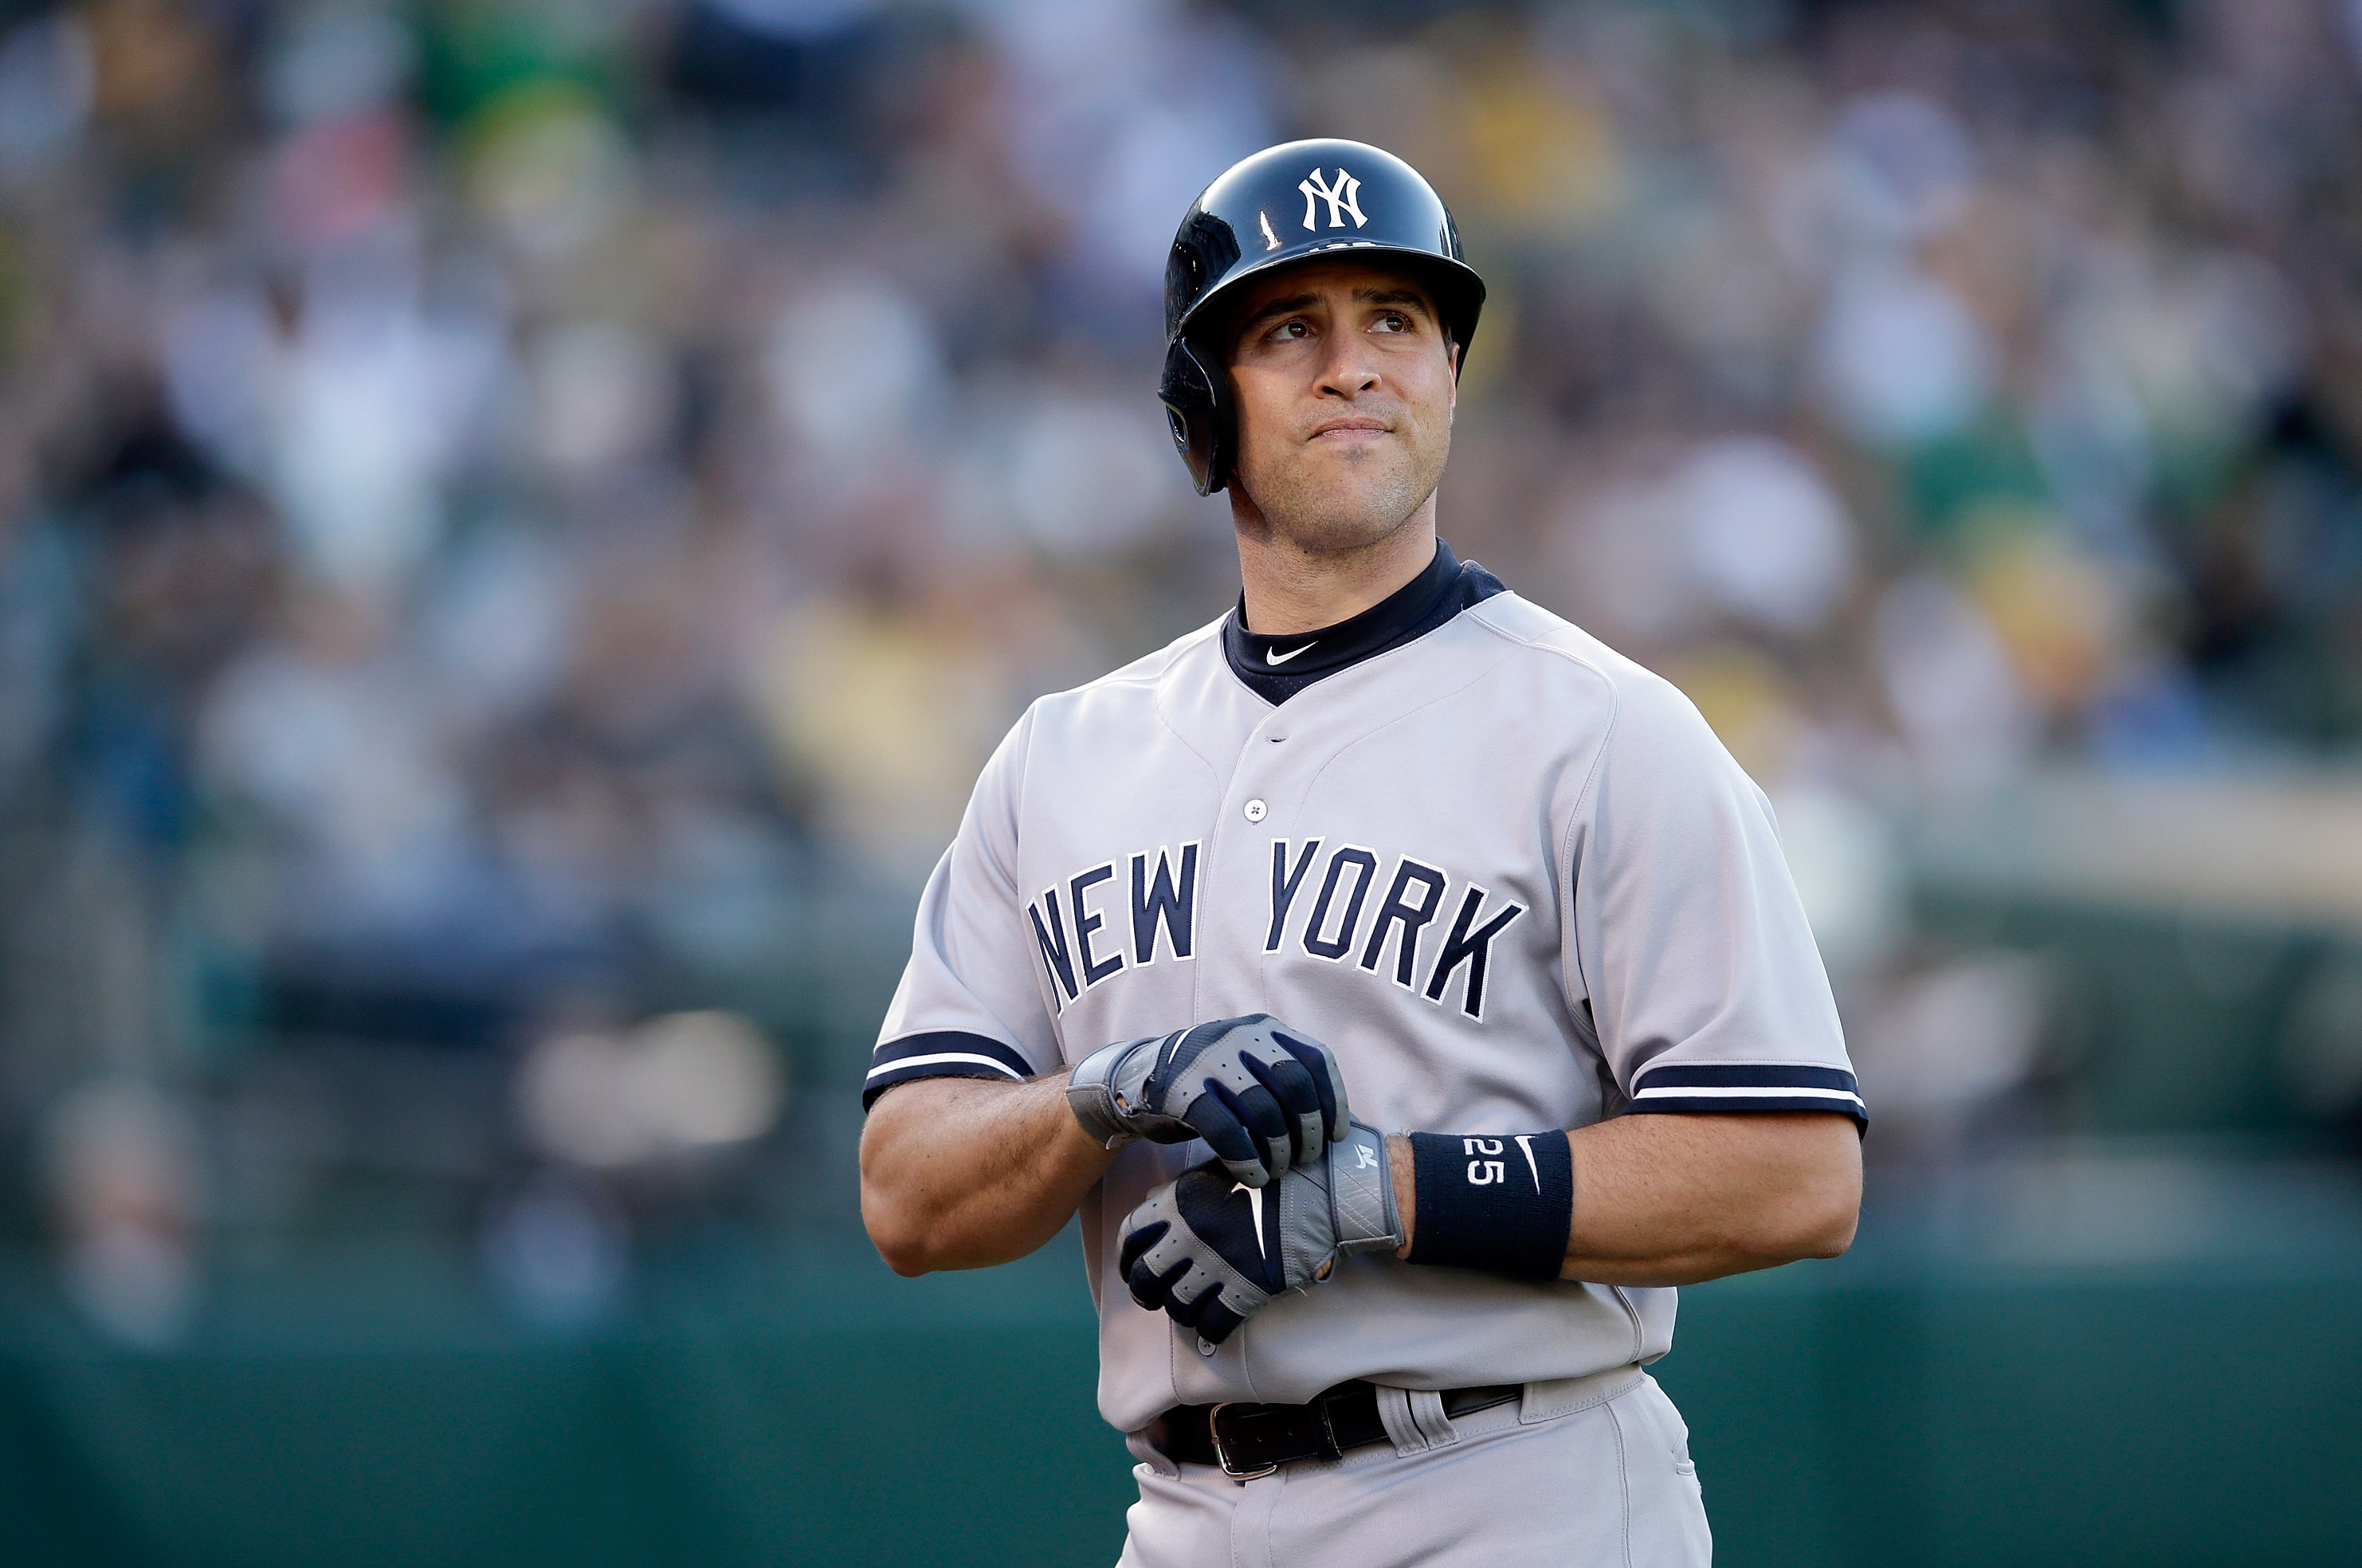 Ranking the Greatest Moments of Mark Teixeira's Yankees Career